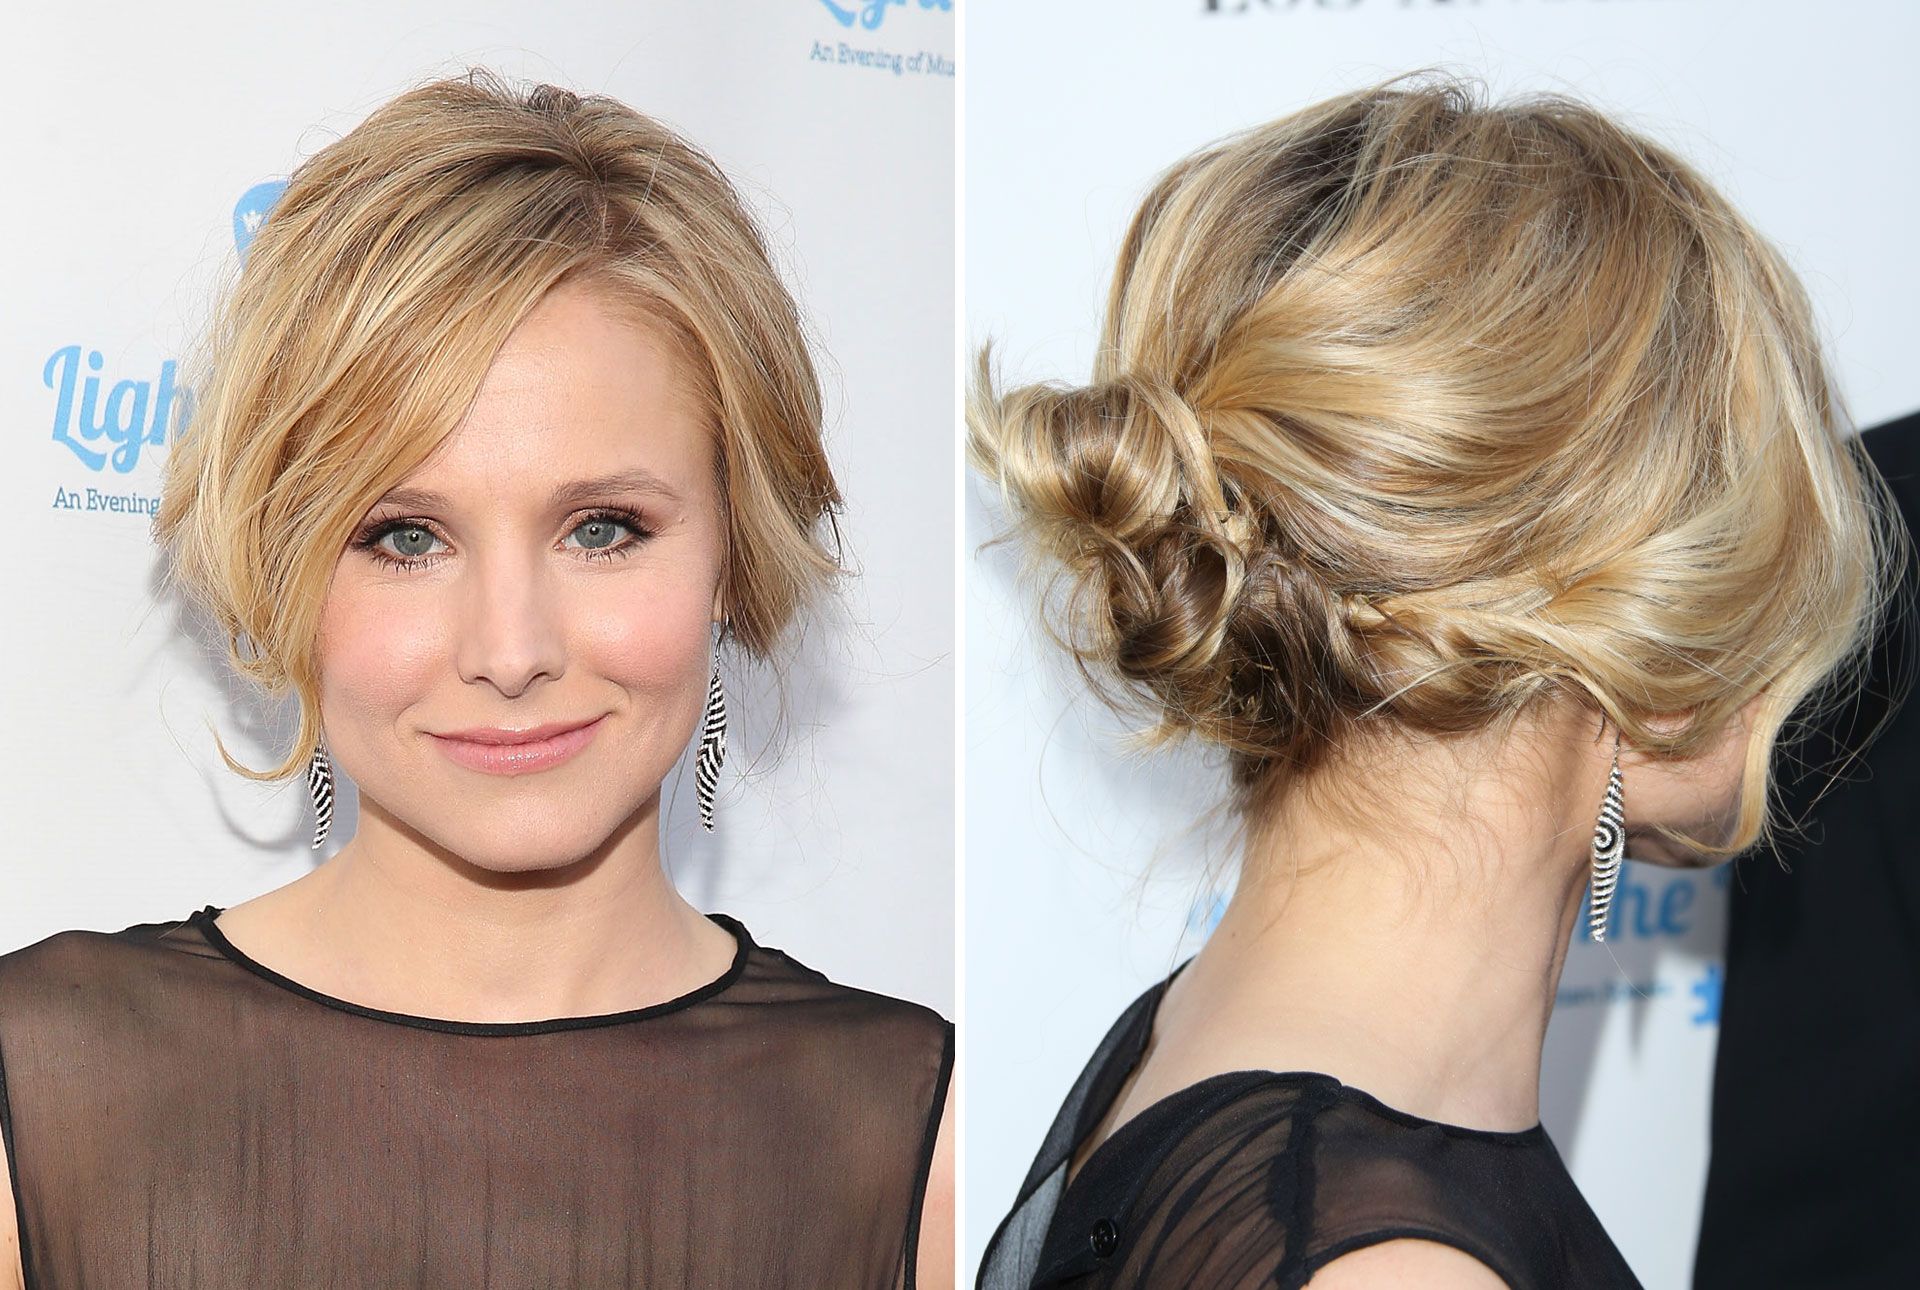 wedding guest hairstyles for short hair